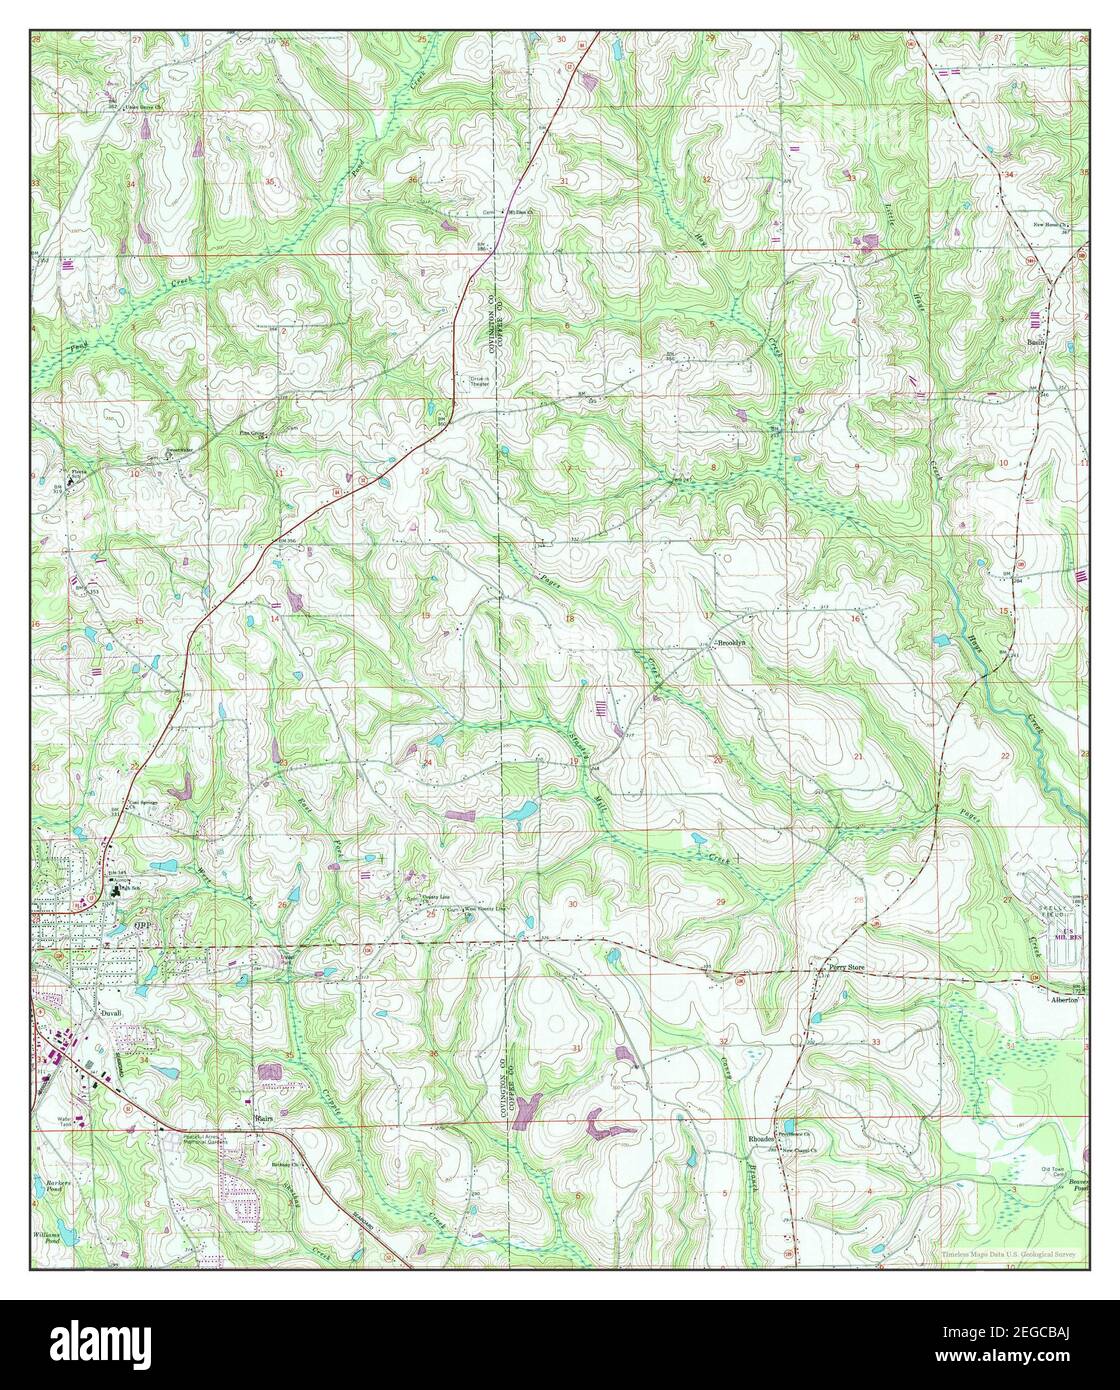 Opp East, Alabama, map 1968, 1:24000, United States of America by Timeless Maps, data U.S. Geological Survey Stock Photo